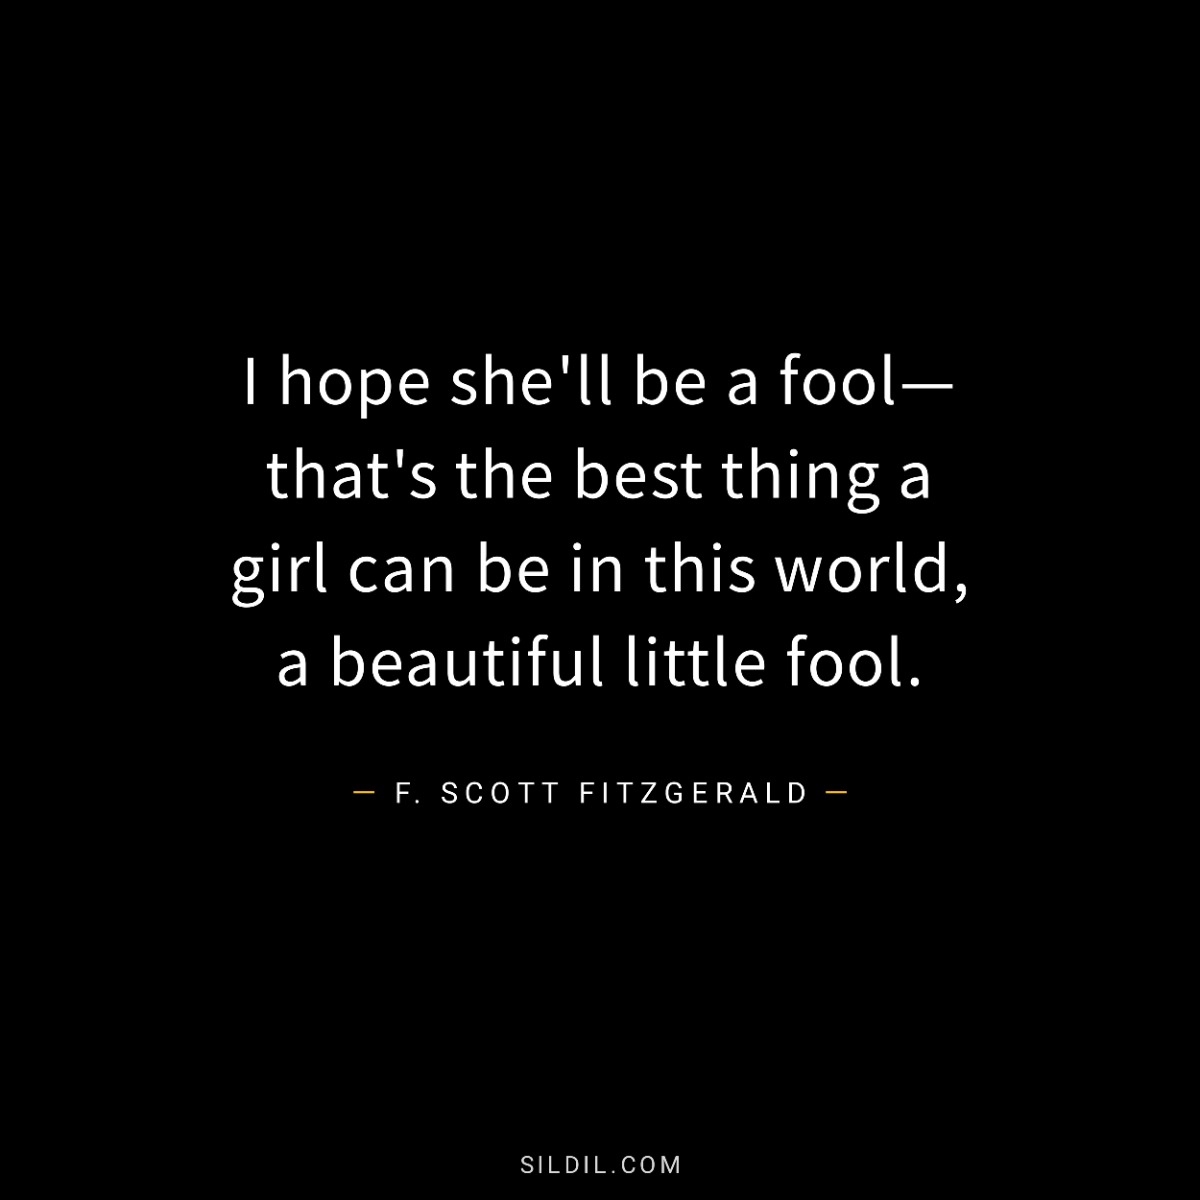 I hope she'll be a fool—that's the best thing a girl can be in this world, a beautiful little fool.